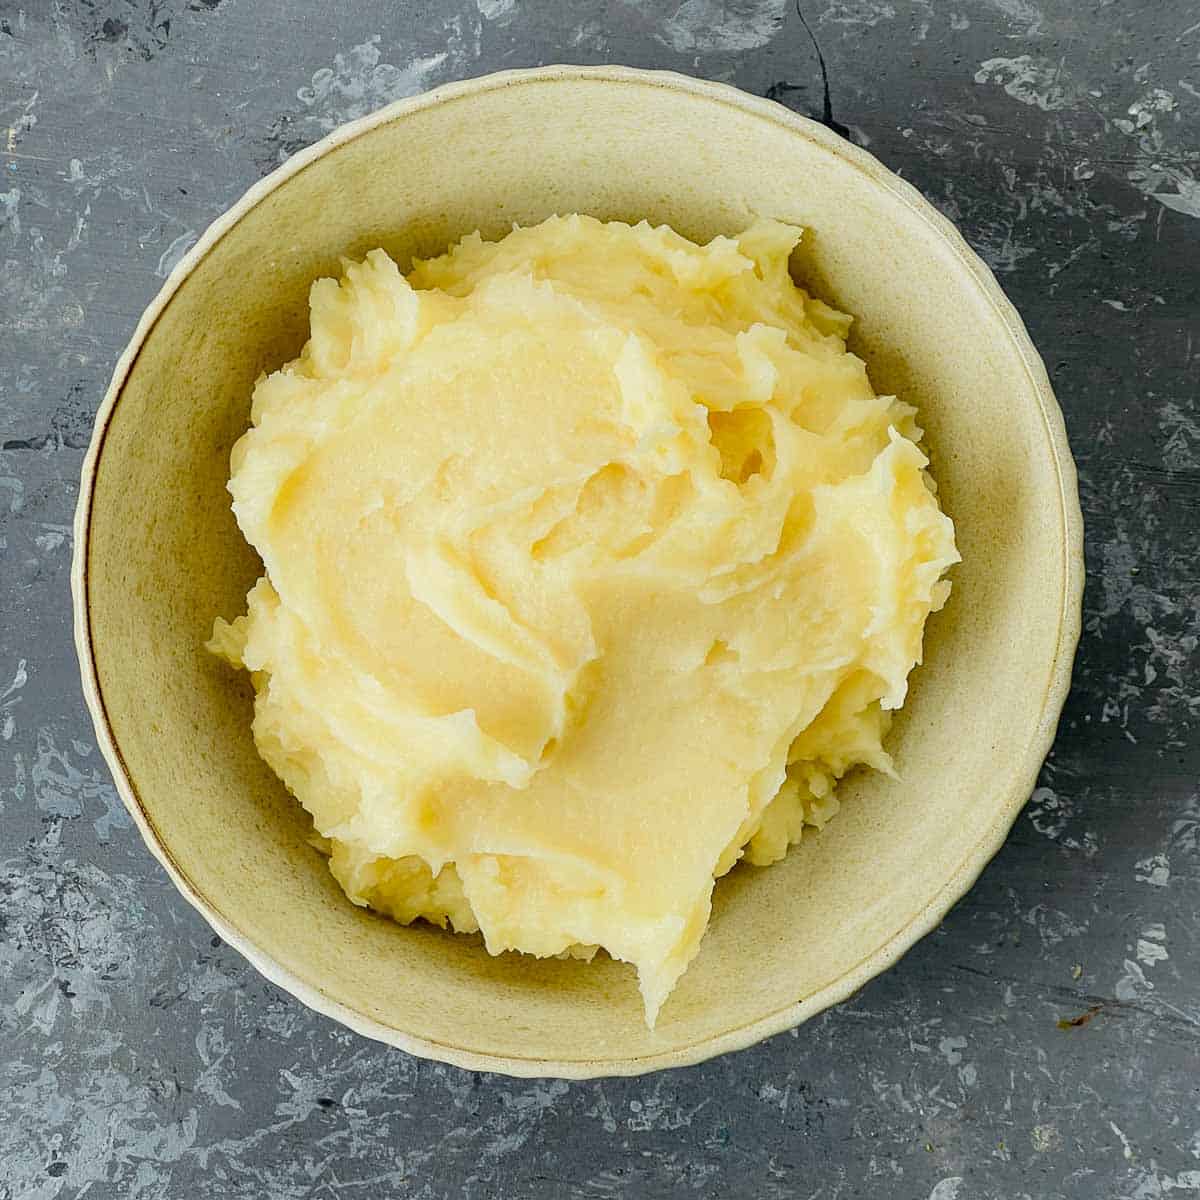 Boil and mash the potatoes.